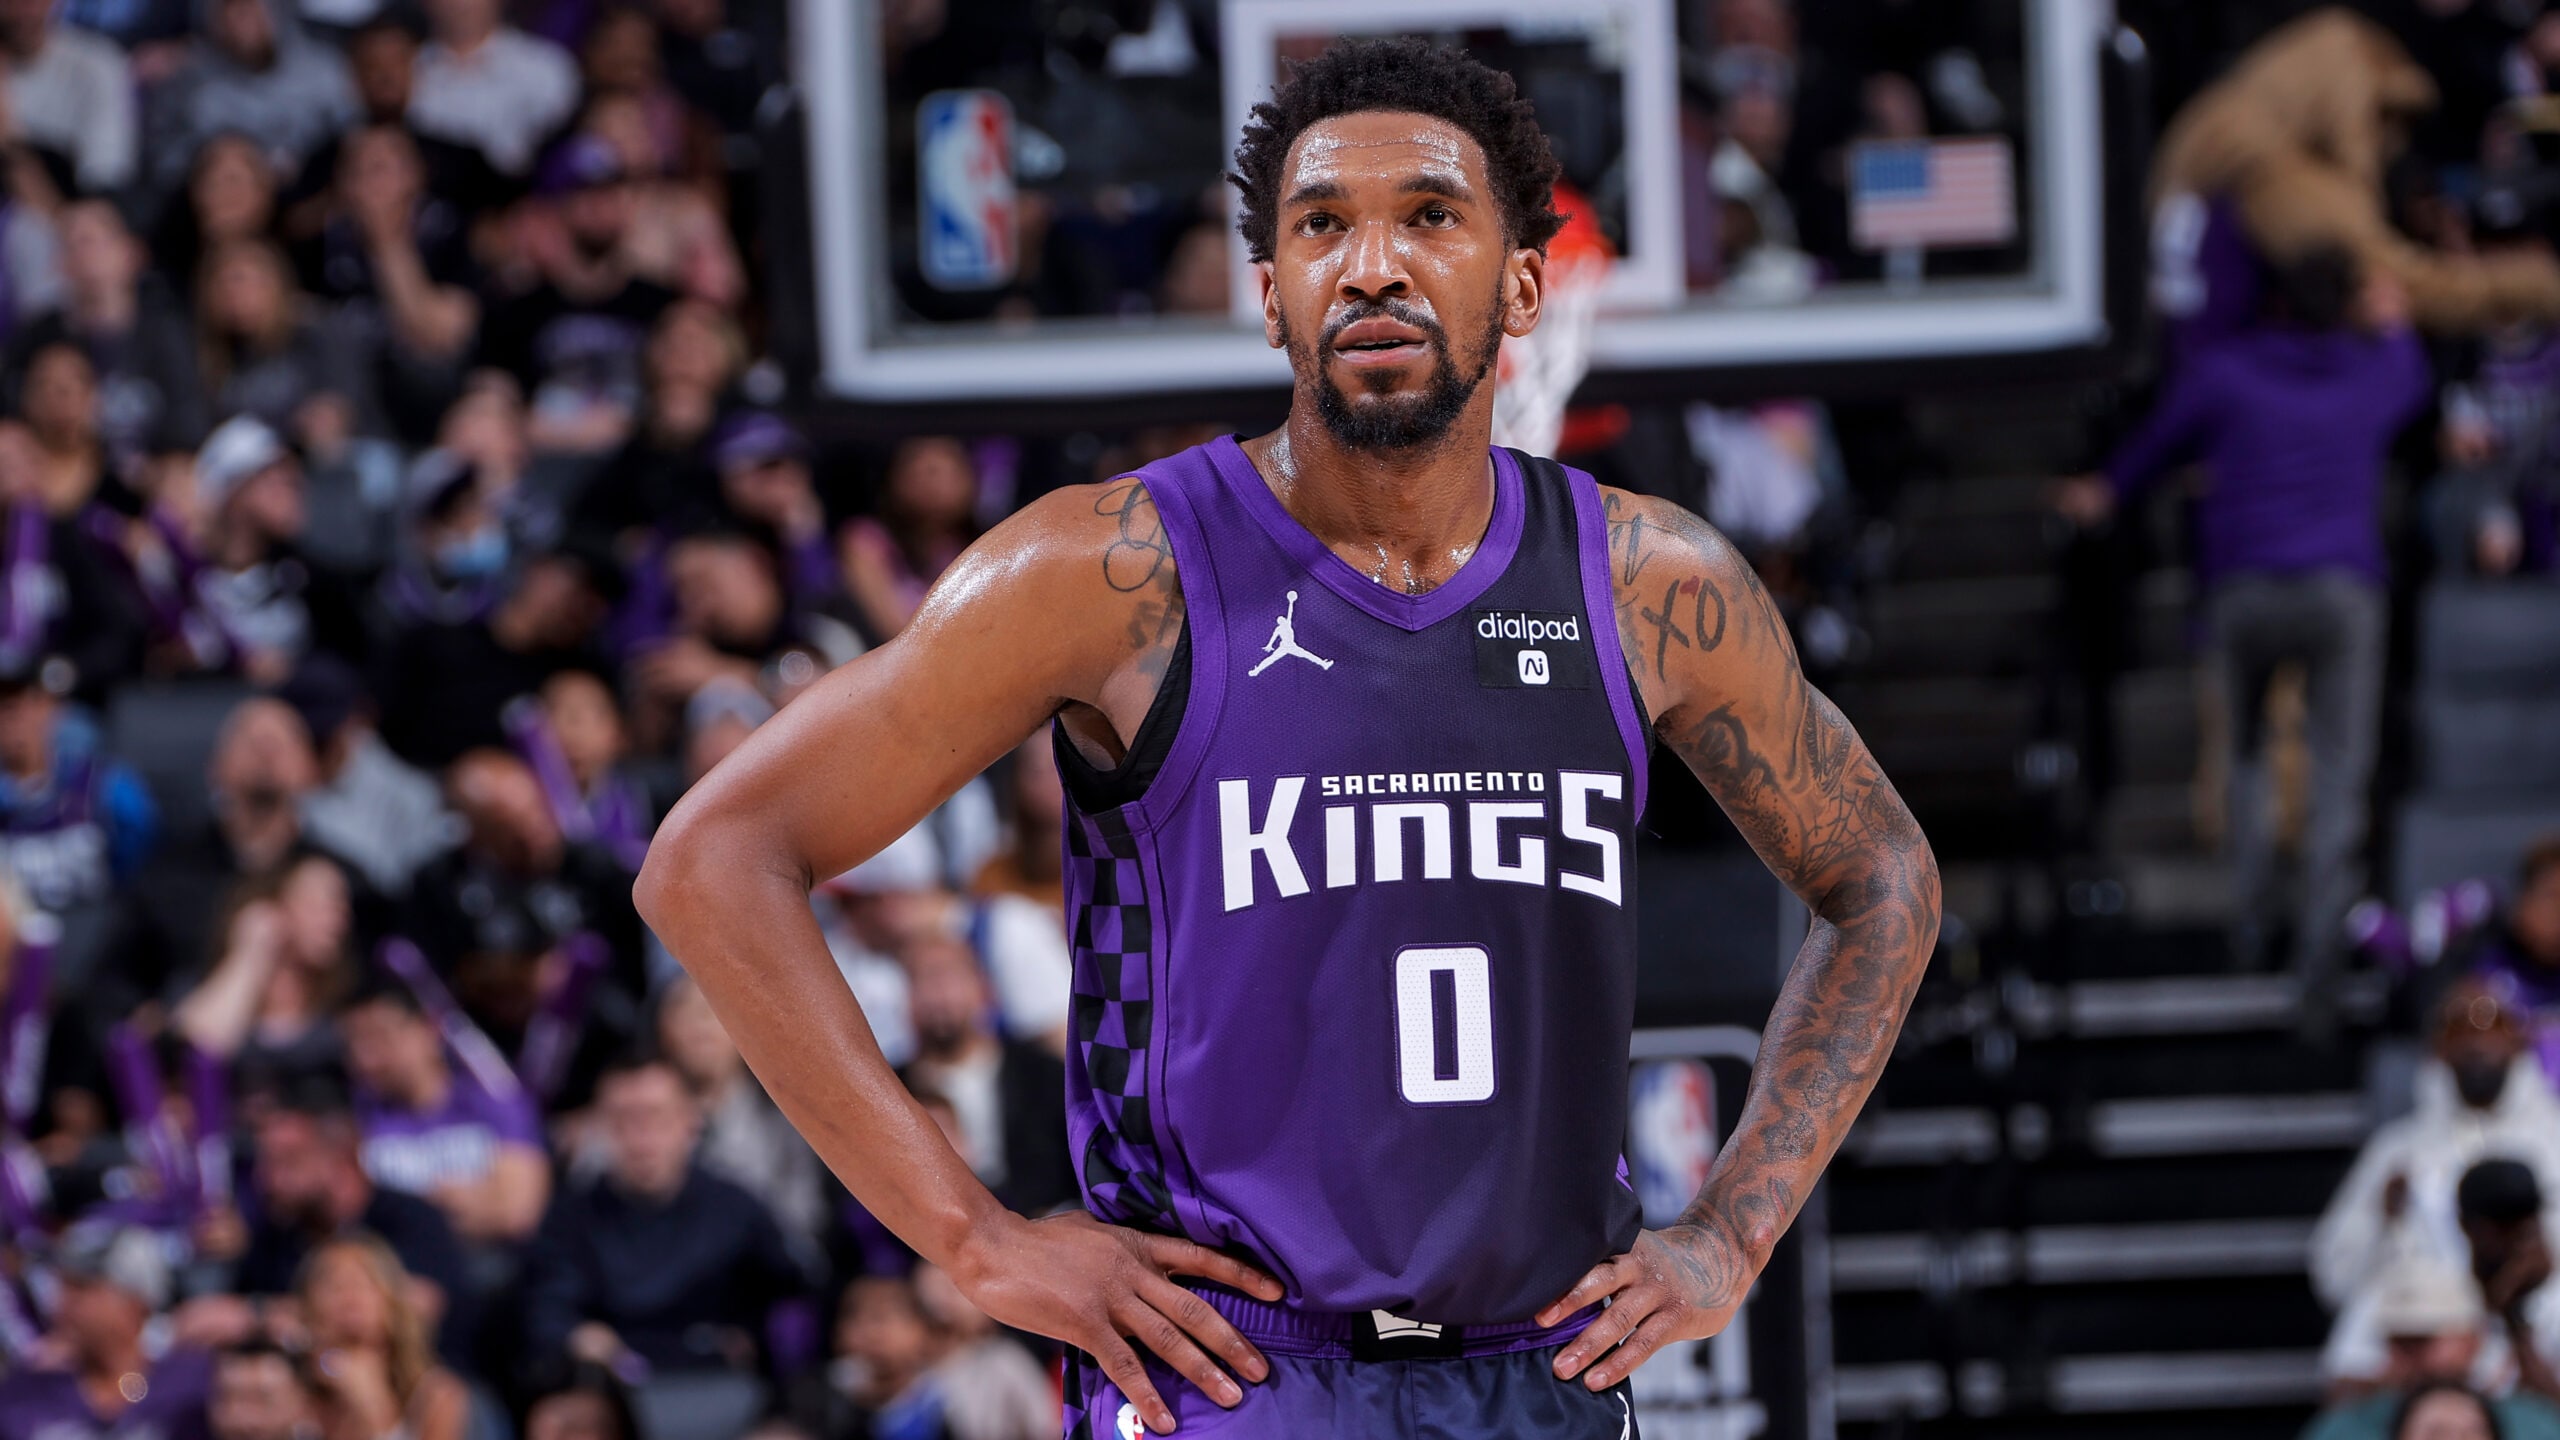 Reports: Kings guard Malik Monk out 4-6 weeks with knee injury